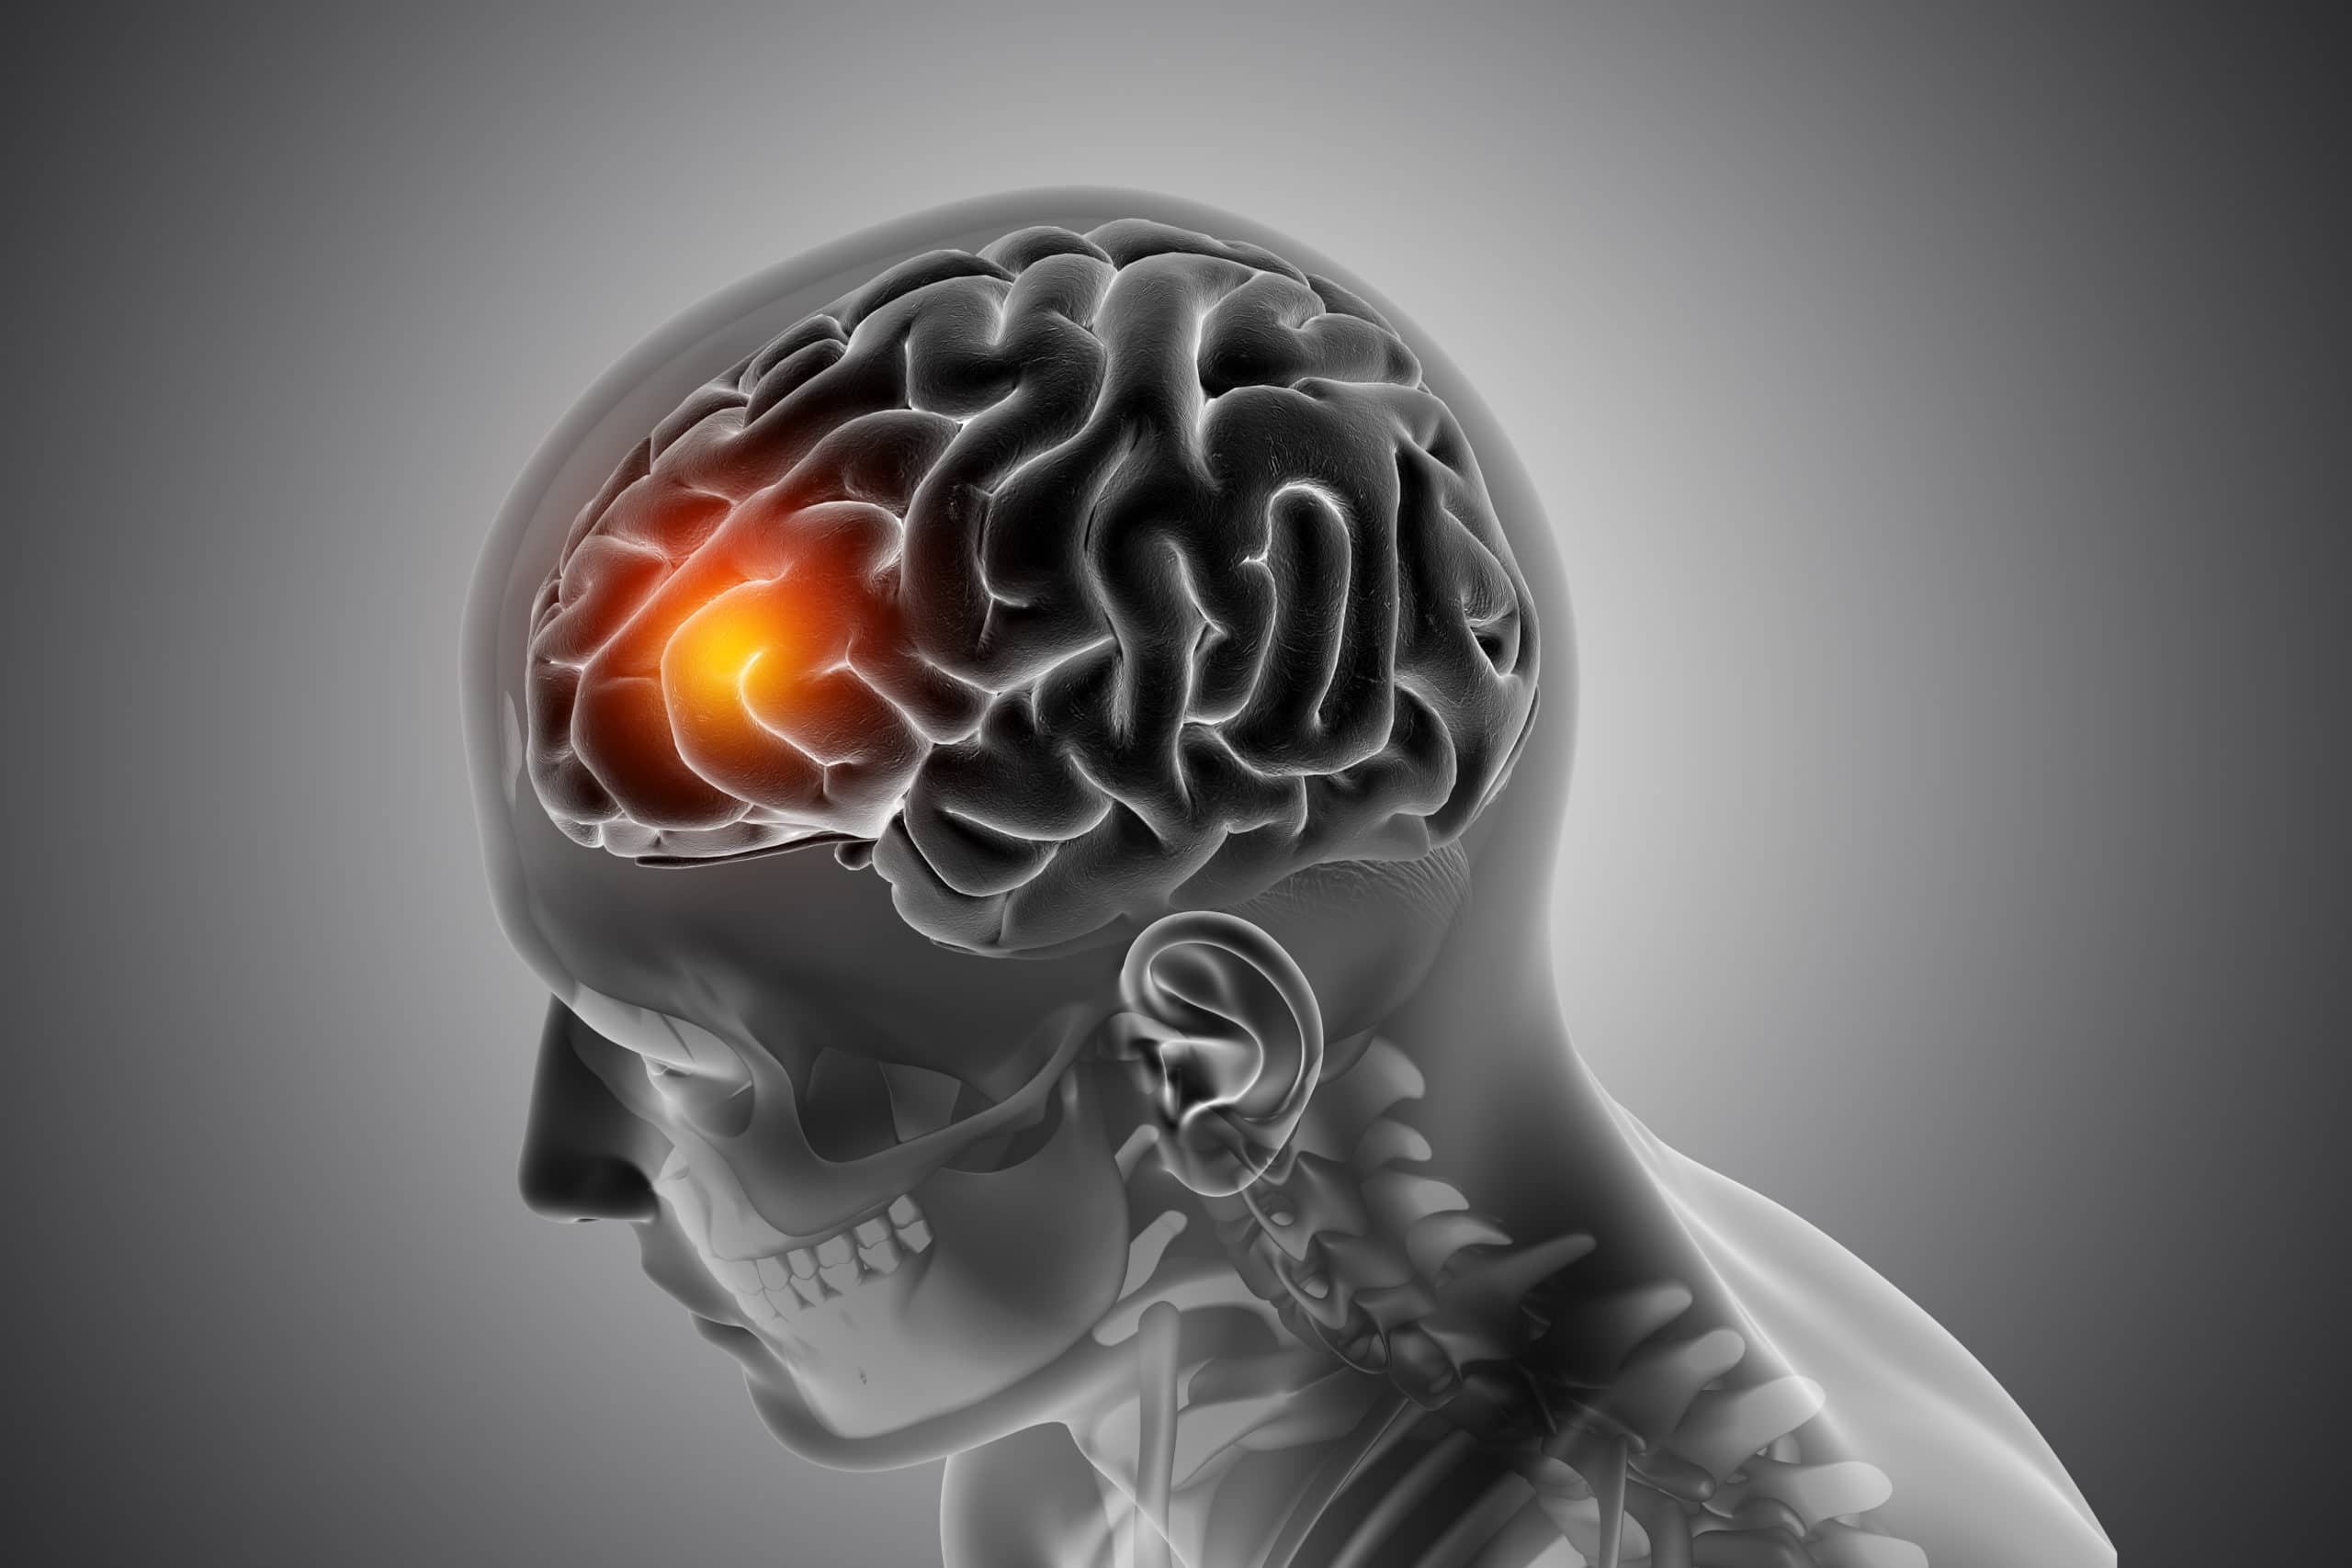 3D render of a male medical figure with front of the brain highlighted with dementia